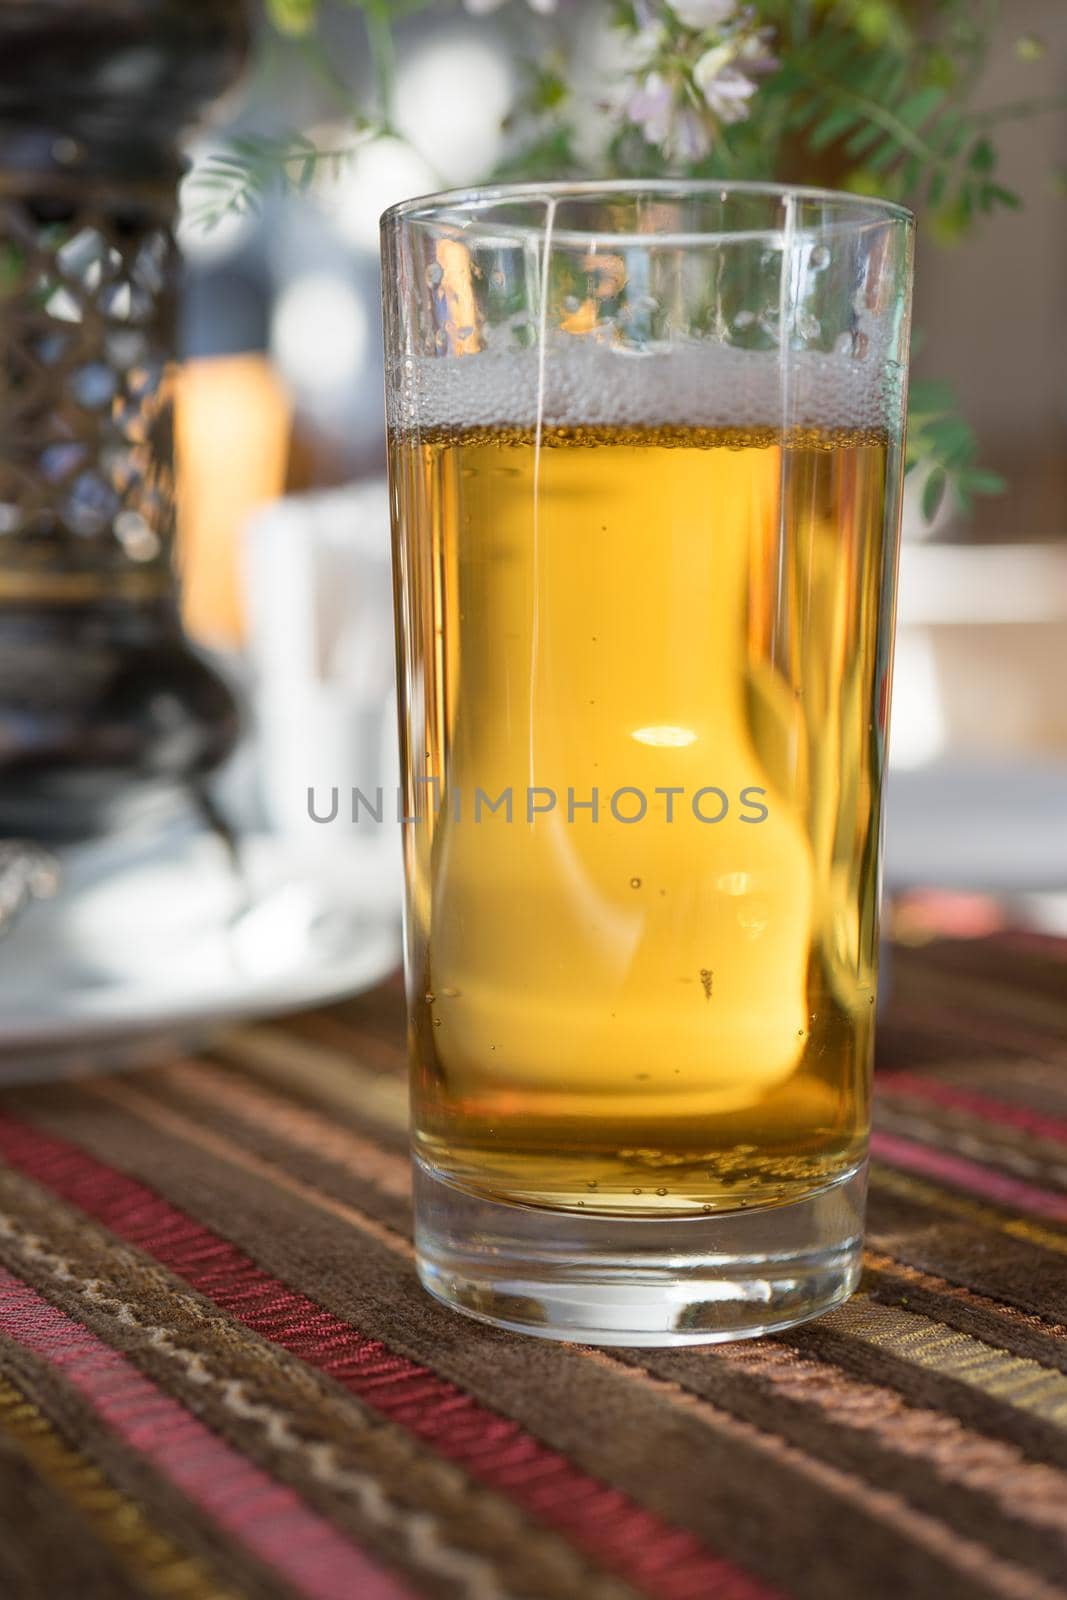 A glass of non-alcoholic beer in the Crimean Tatar cafe on the background of the interior.